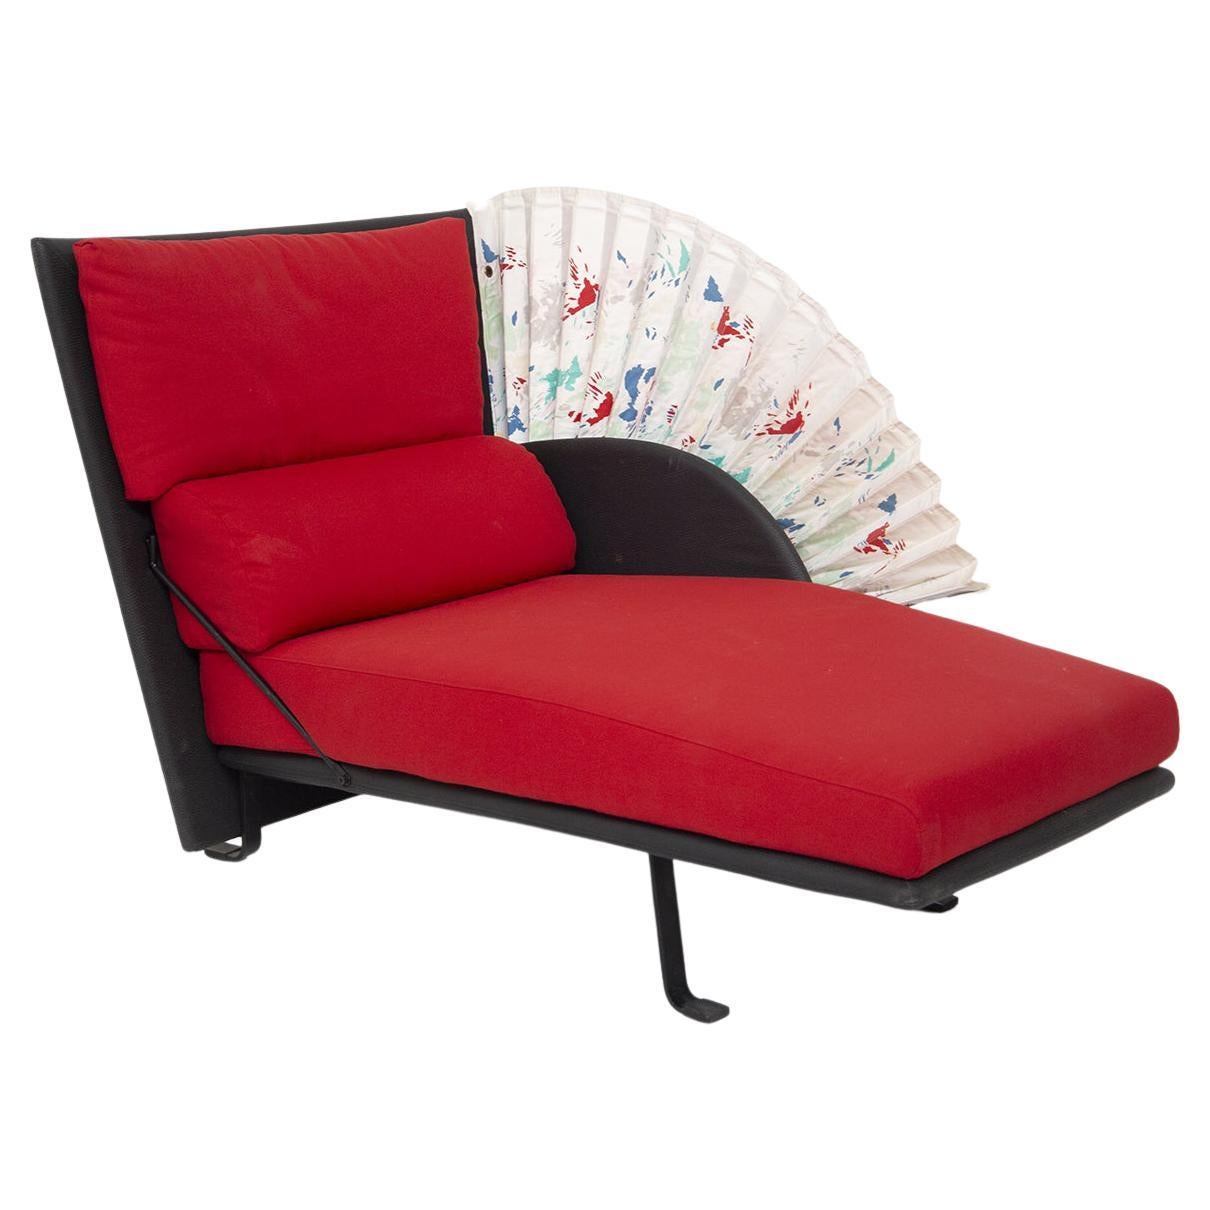 "Le Mirande" Chaise Longue By Paolo Nava for Flexiform in Leather and Cotton